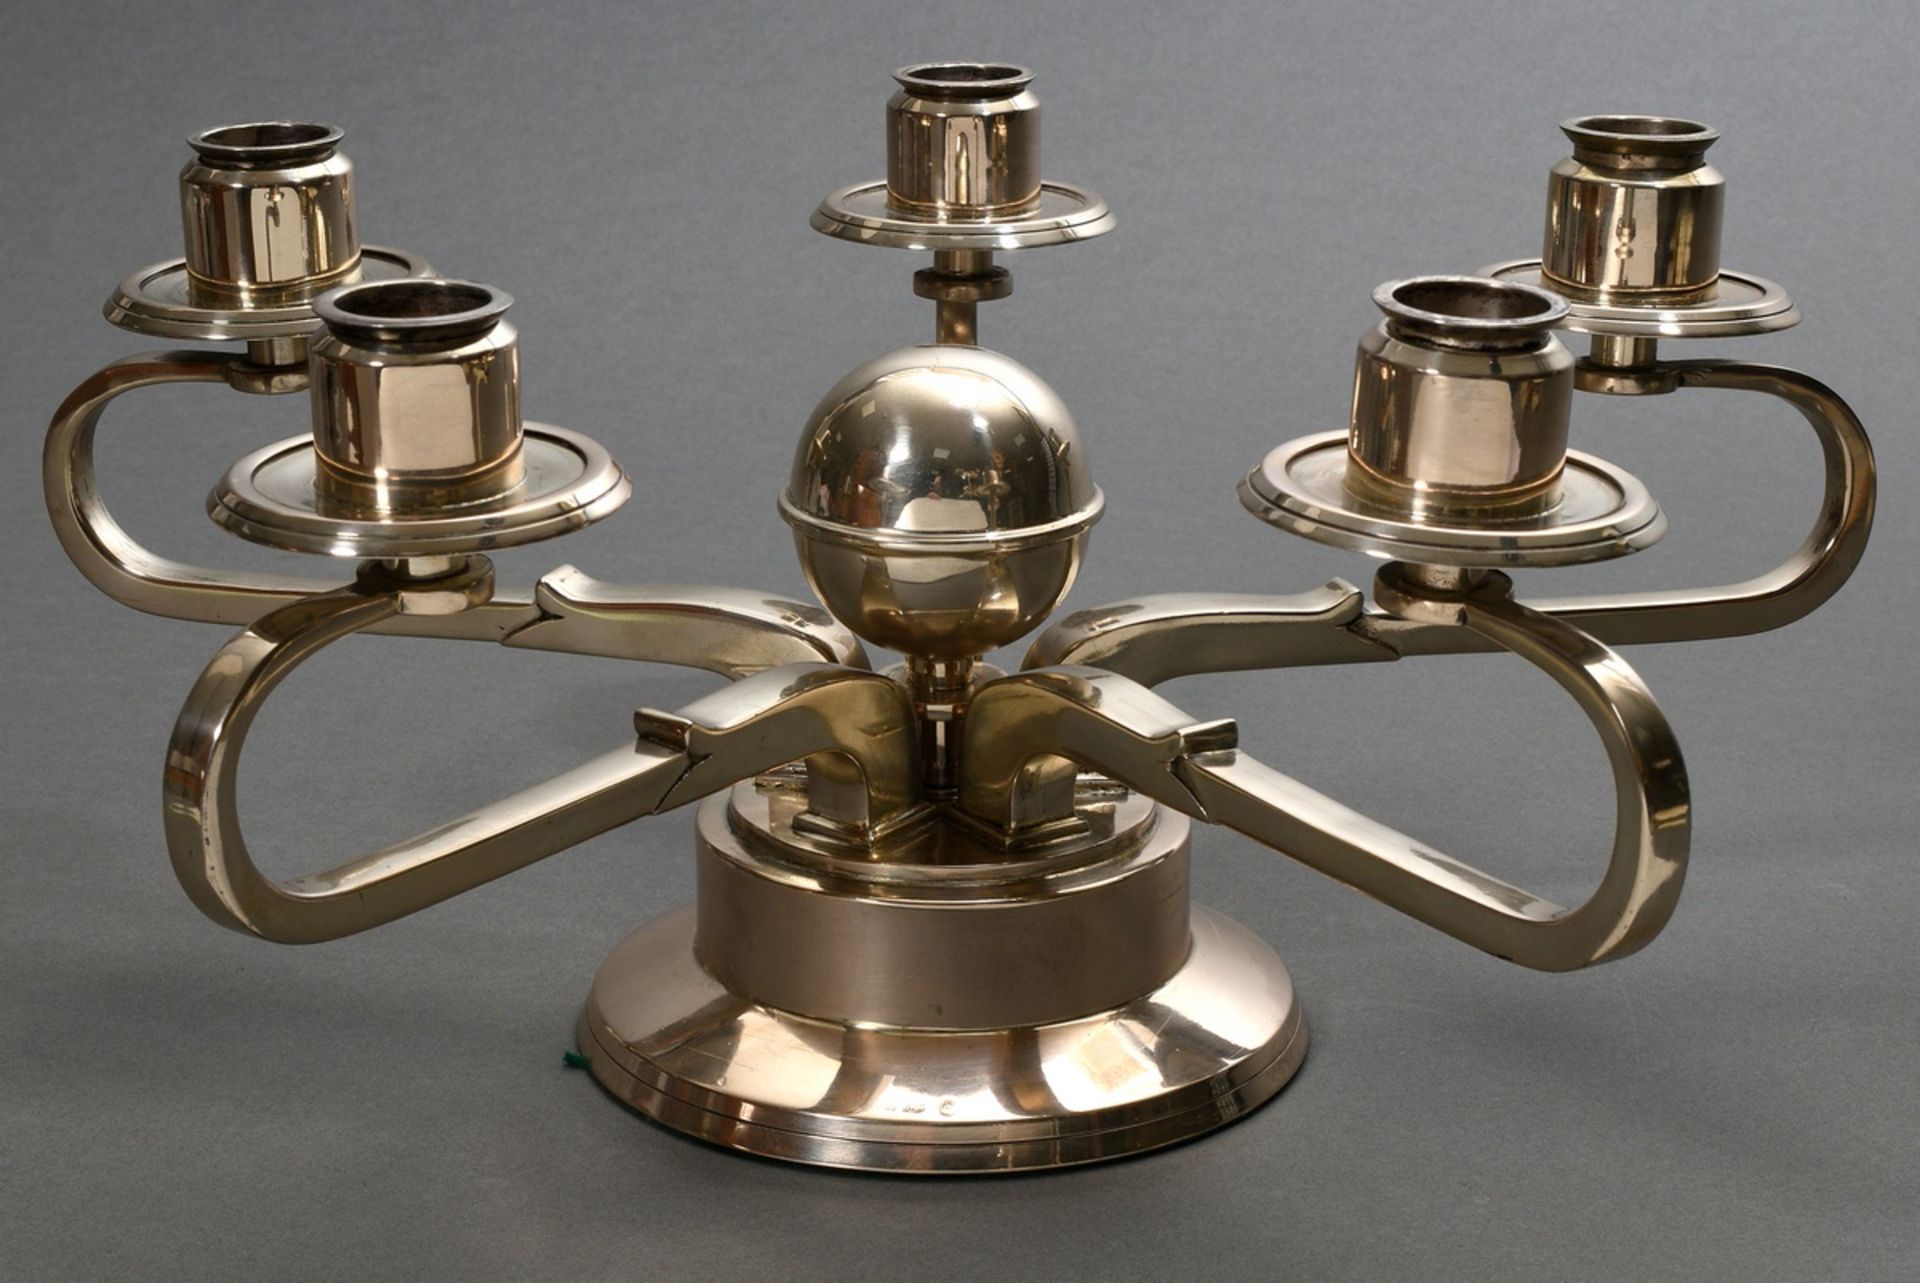 Art Deco girandole with 5 arms around central base, 800 silver filled, h. 17cm, Ø approx. 43cm - Image 5 of 5